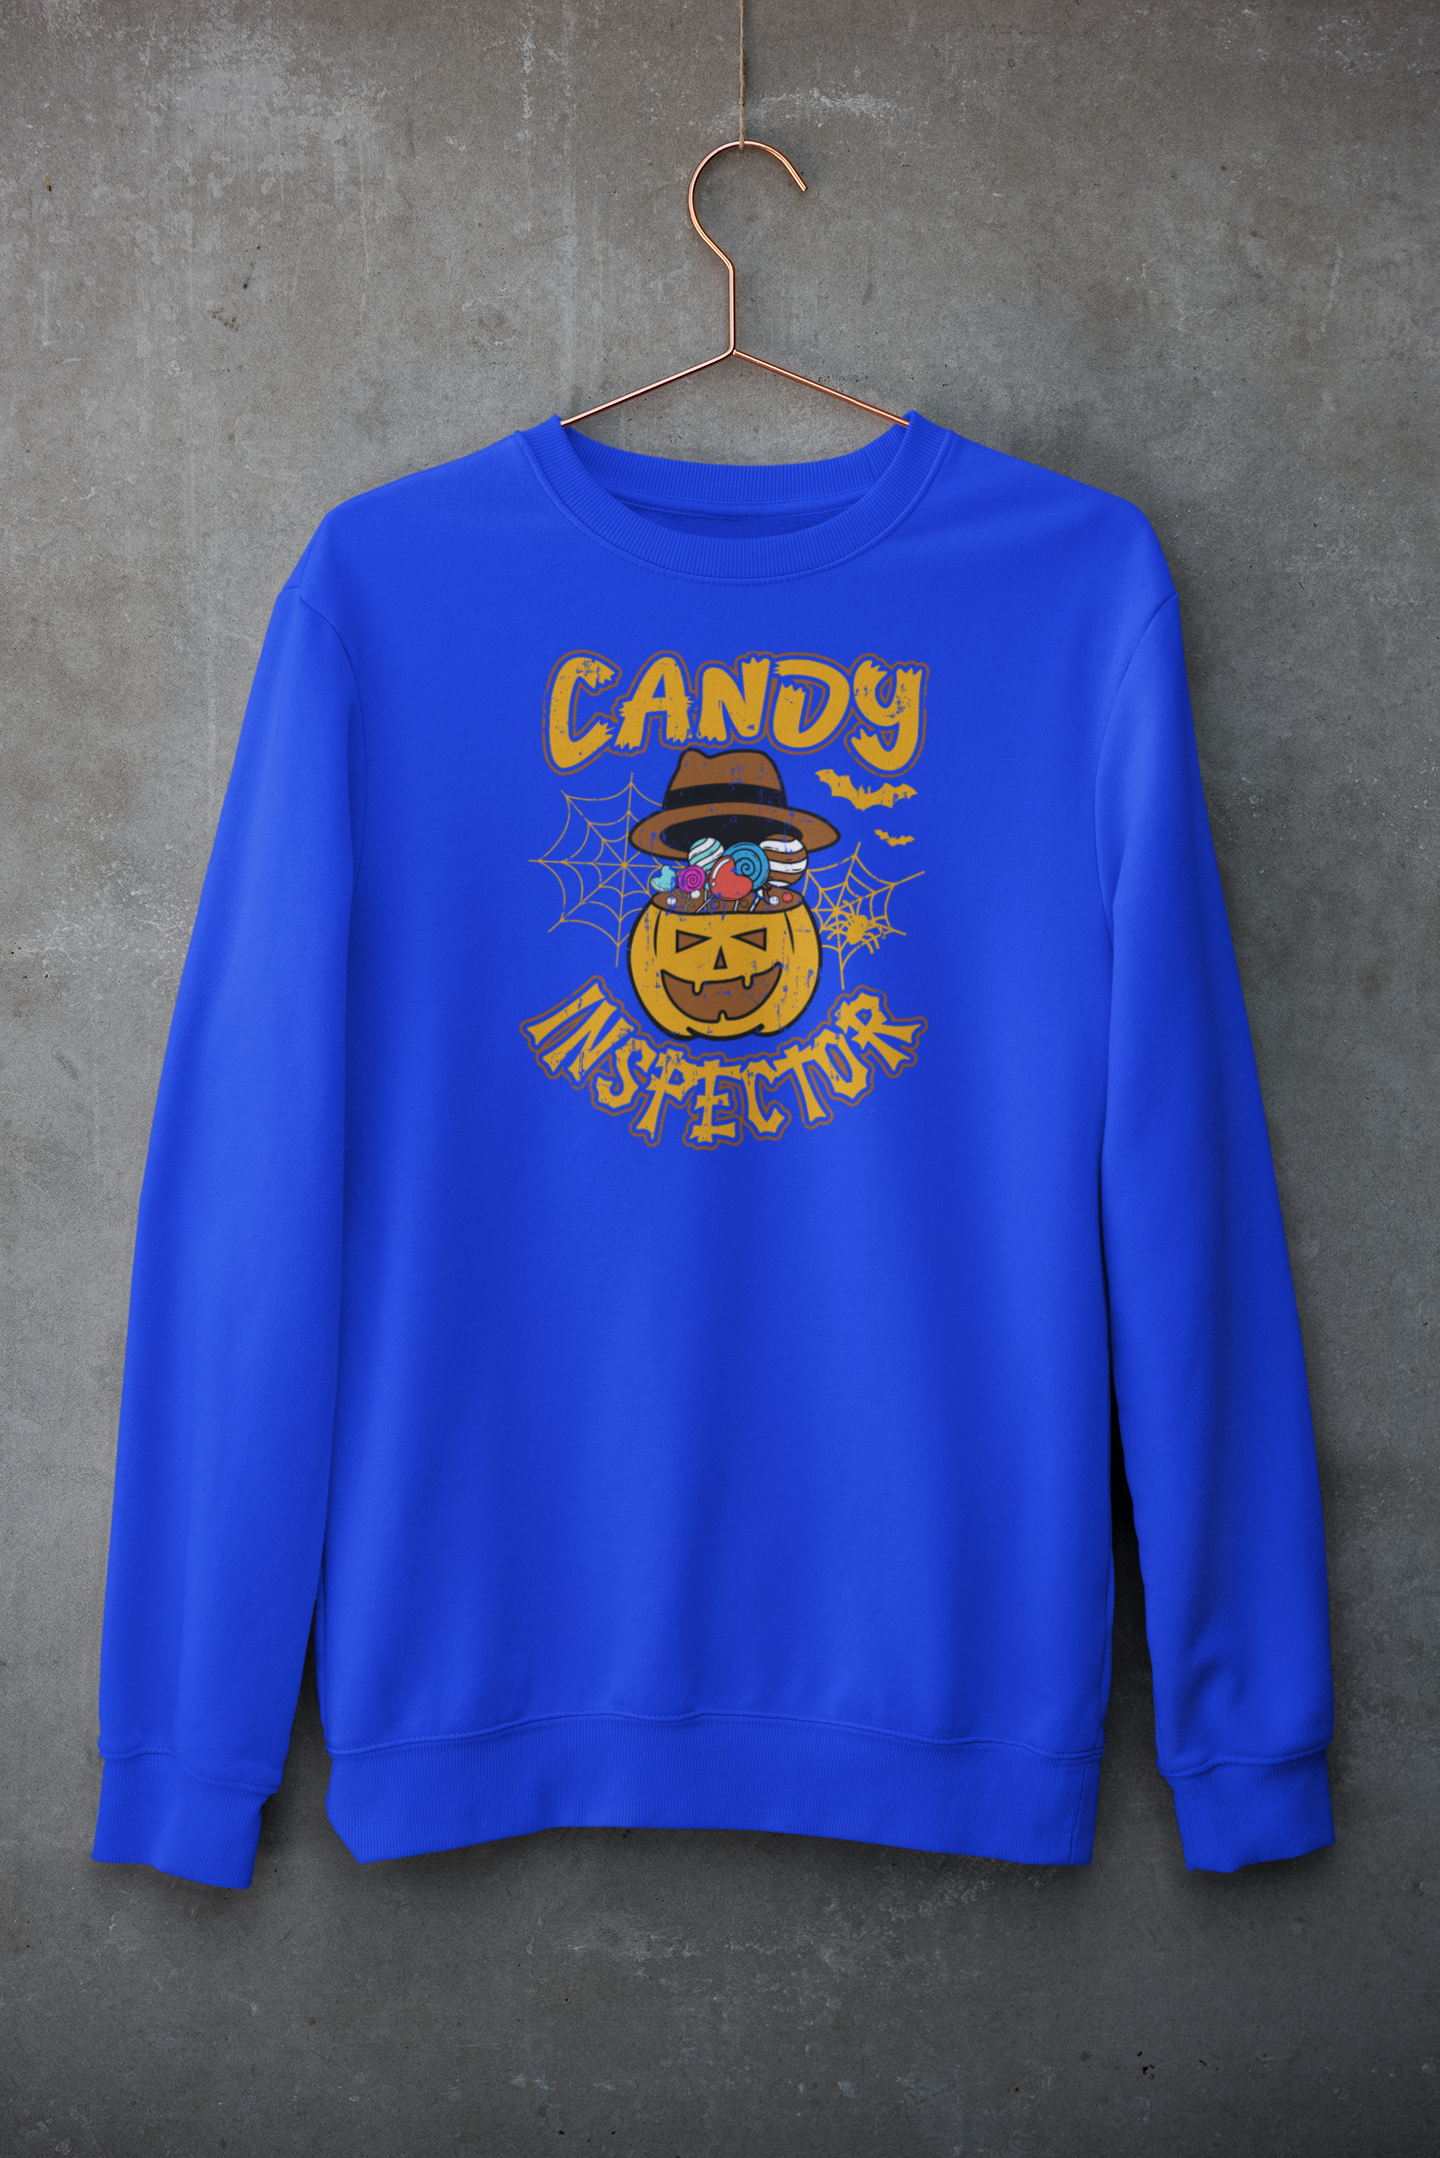 Candy Inspector w/ Jack-O' Lantern Printed Adult Sweatshirt- For Man Or Woman Adult For Halloween